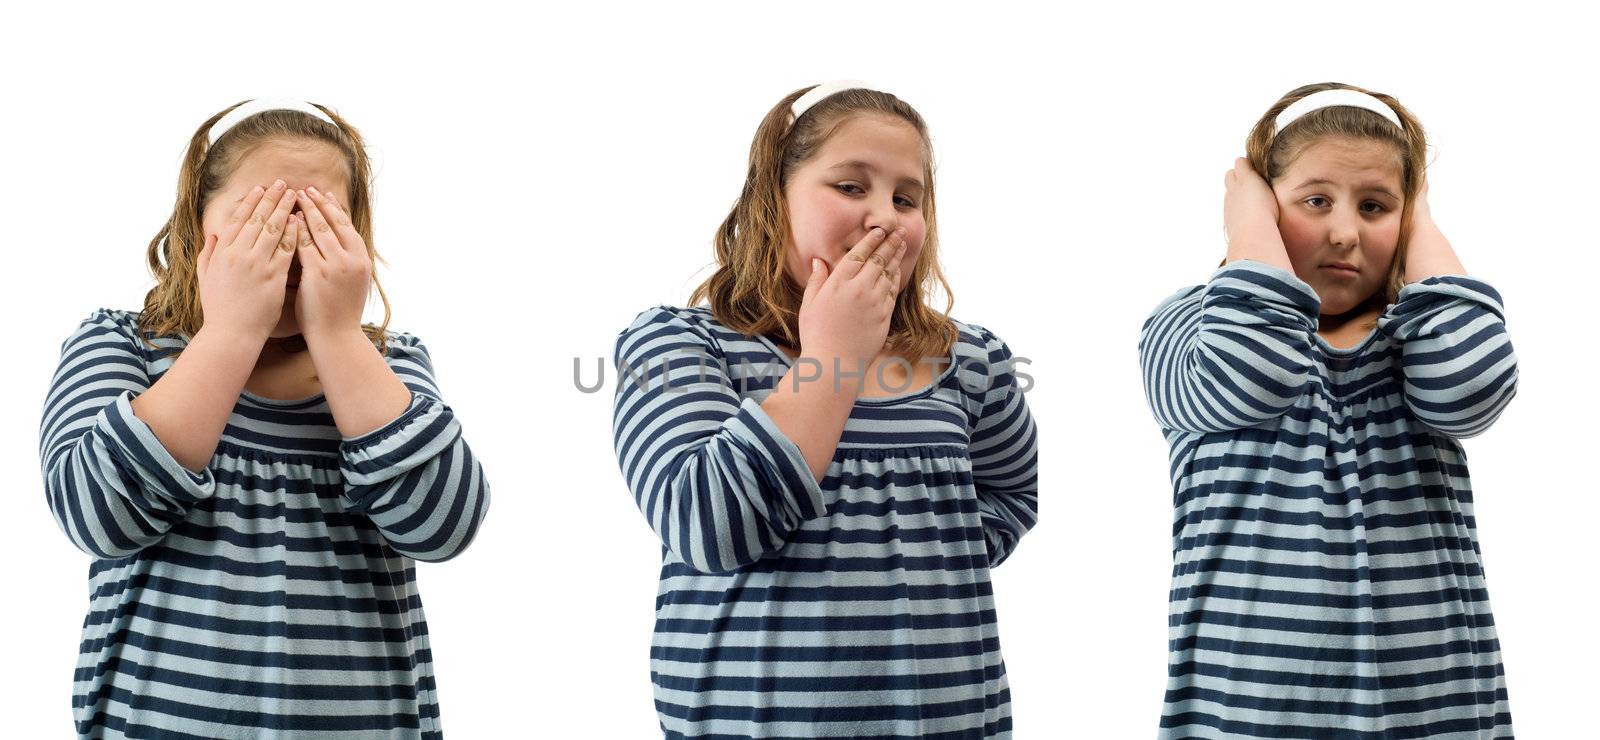 Young girl doing the actions for see, speak, and hear no evil, isolated against a white background